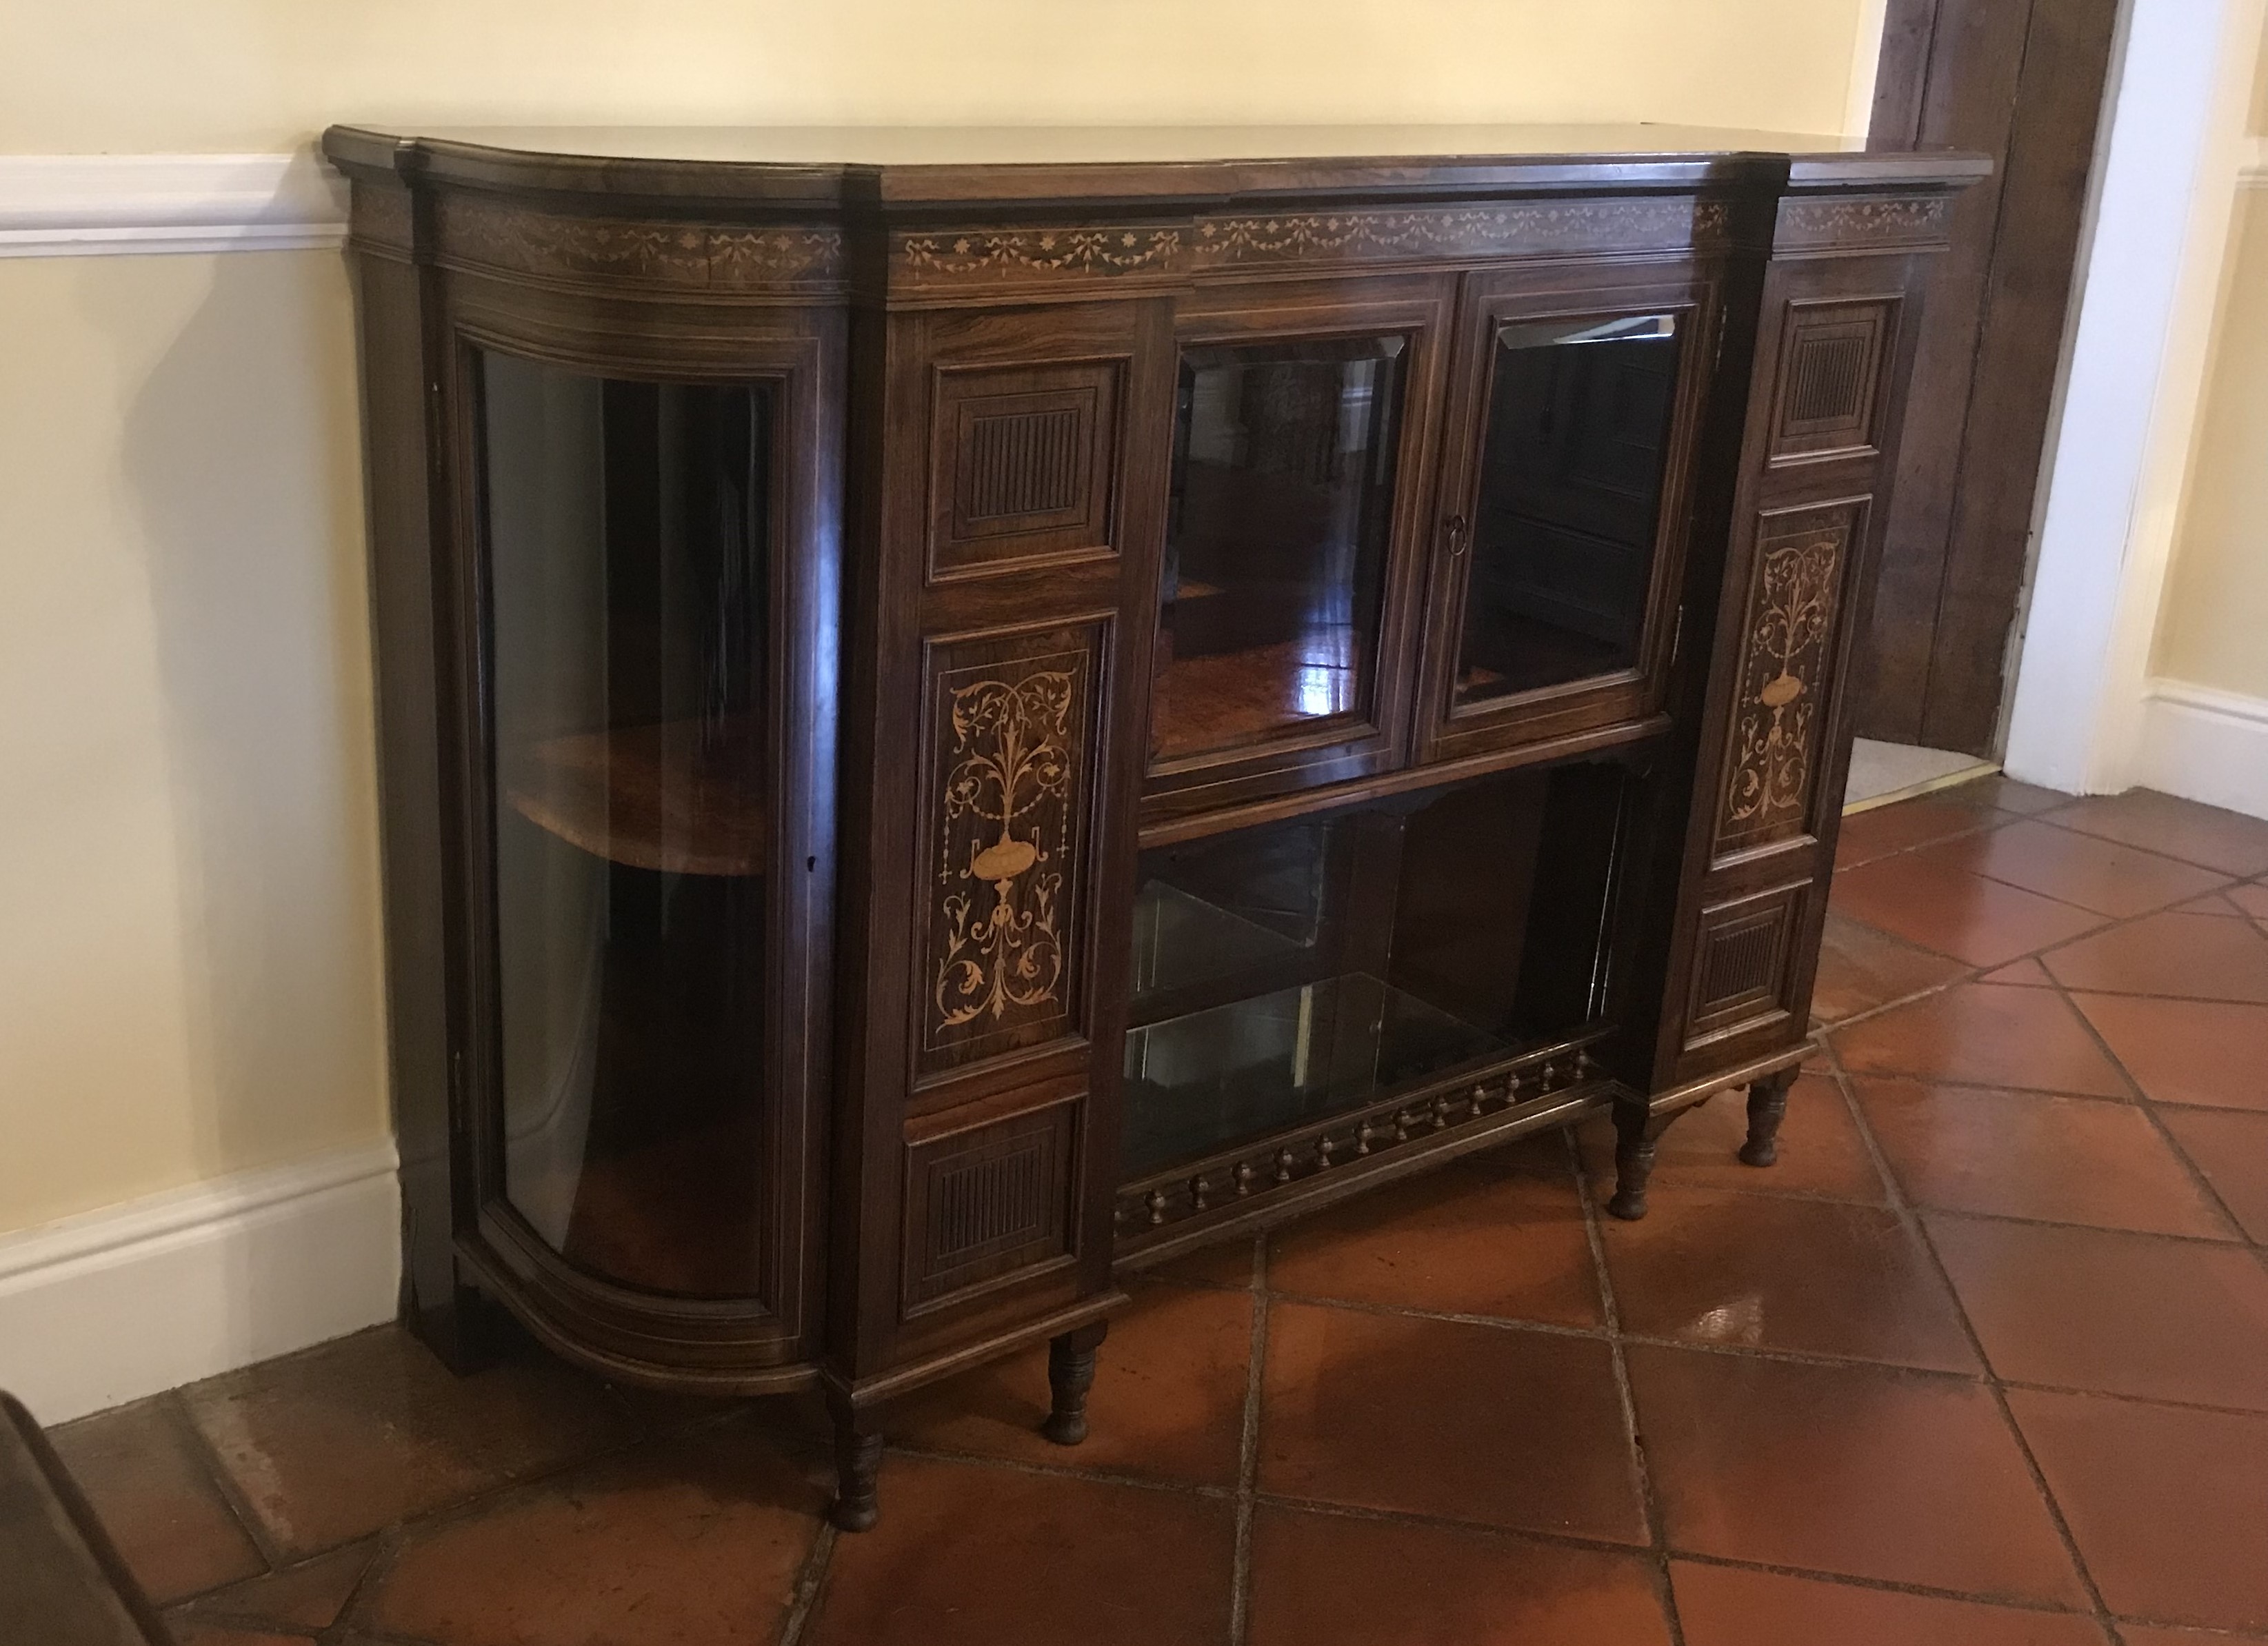 A good quality inverted breakfront credenza with inlaid decoration,